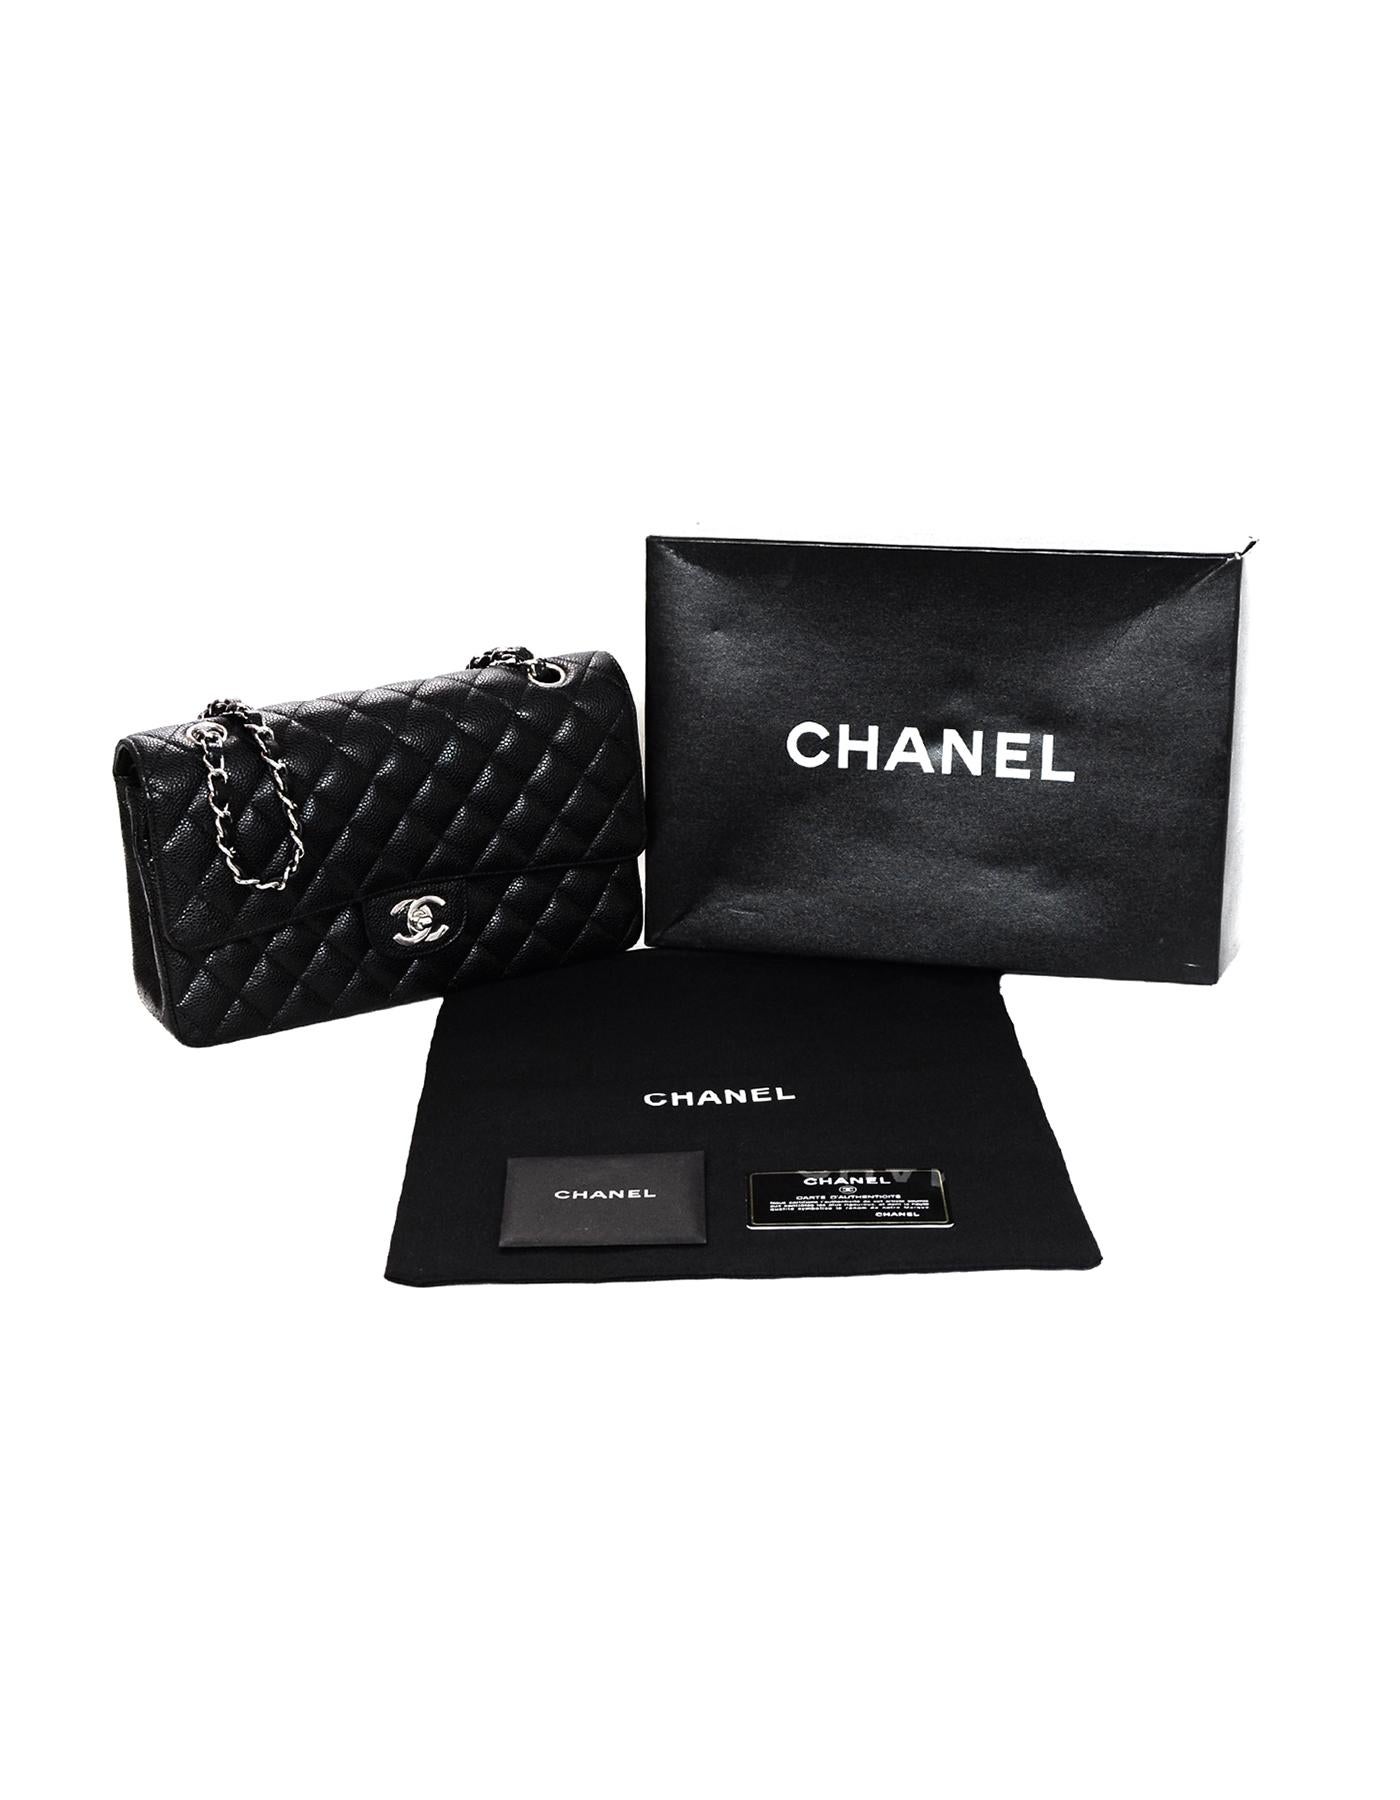 Chanel Black Quilted Caviar Leather Medium 10